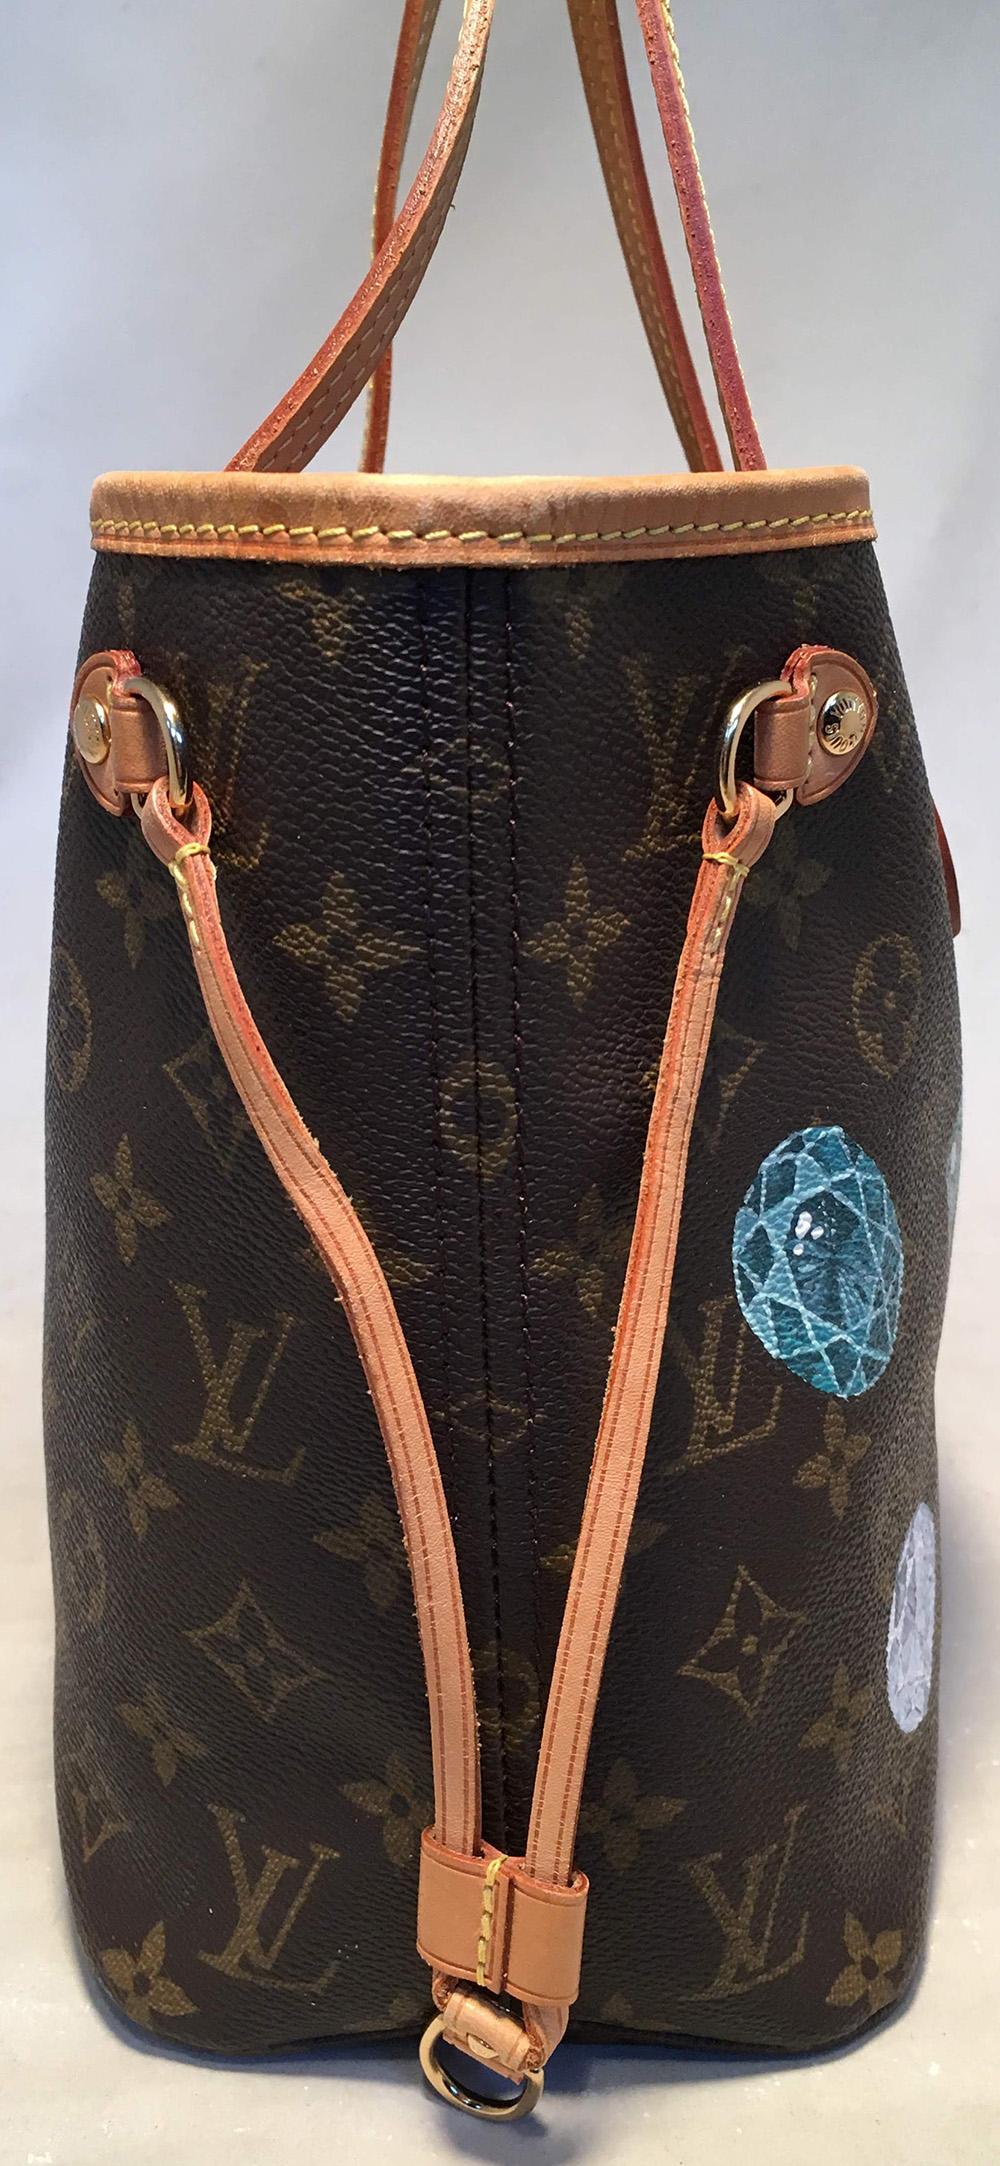 Louis Vuitton Monogram Customized Hand Painted Jewels Neverfull PM Shoulder Bag in excellent condition. Monogram canvas exterior trimmed with tan leather and brass hardware. Customized, hand painted multifaceted gemstone jewels on exterior painted